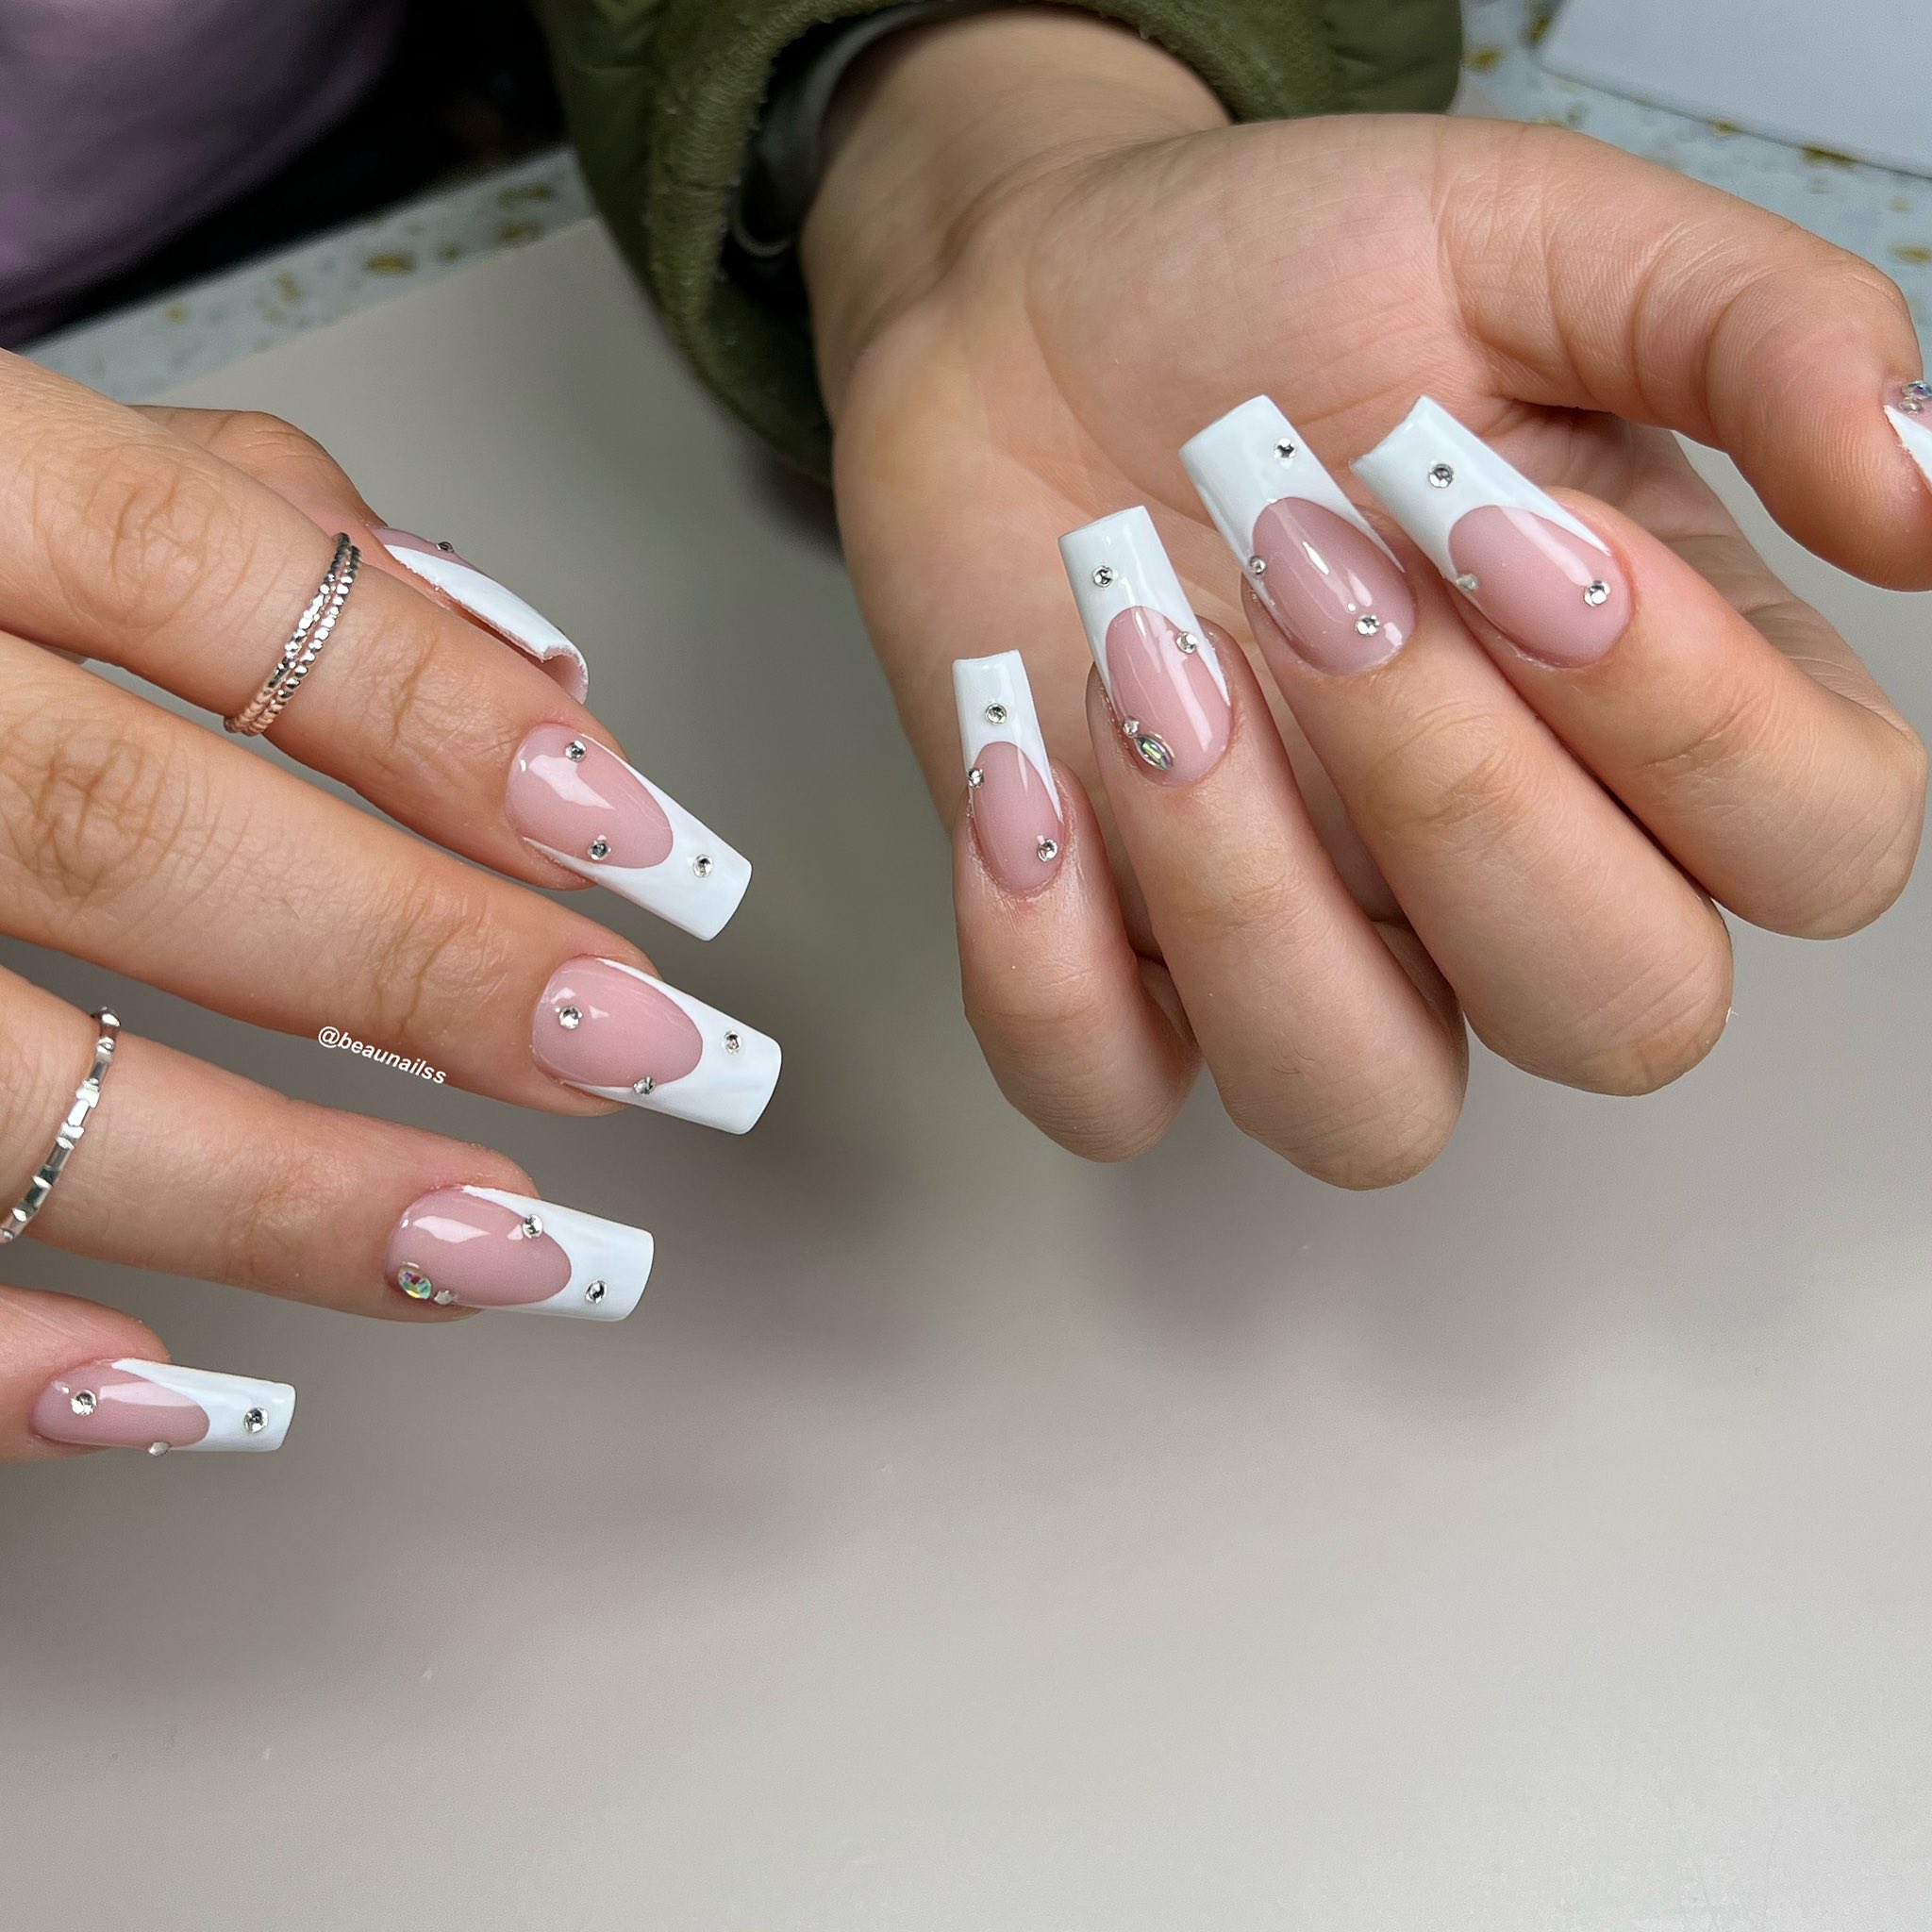 LP eFile Course | Sheffield | Electric Nail File Training | Lucy Pastorelli  – LP Nails